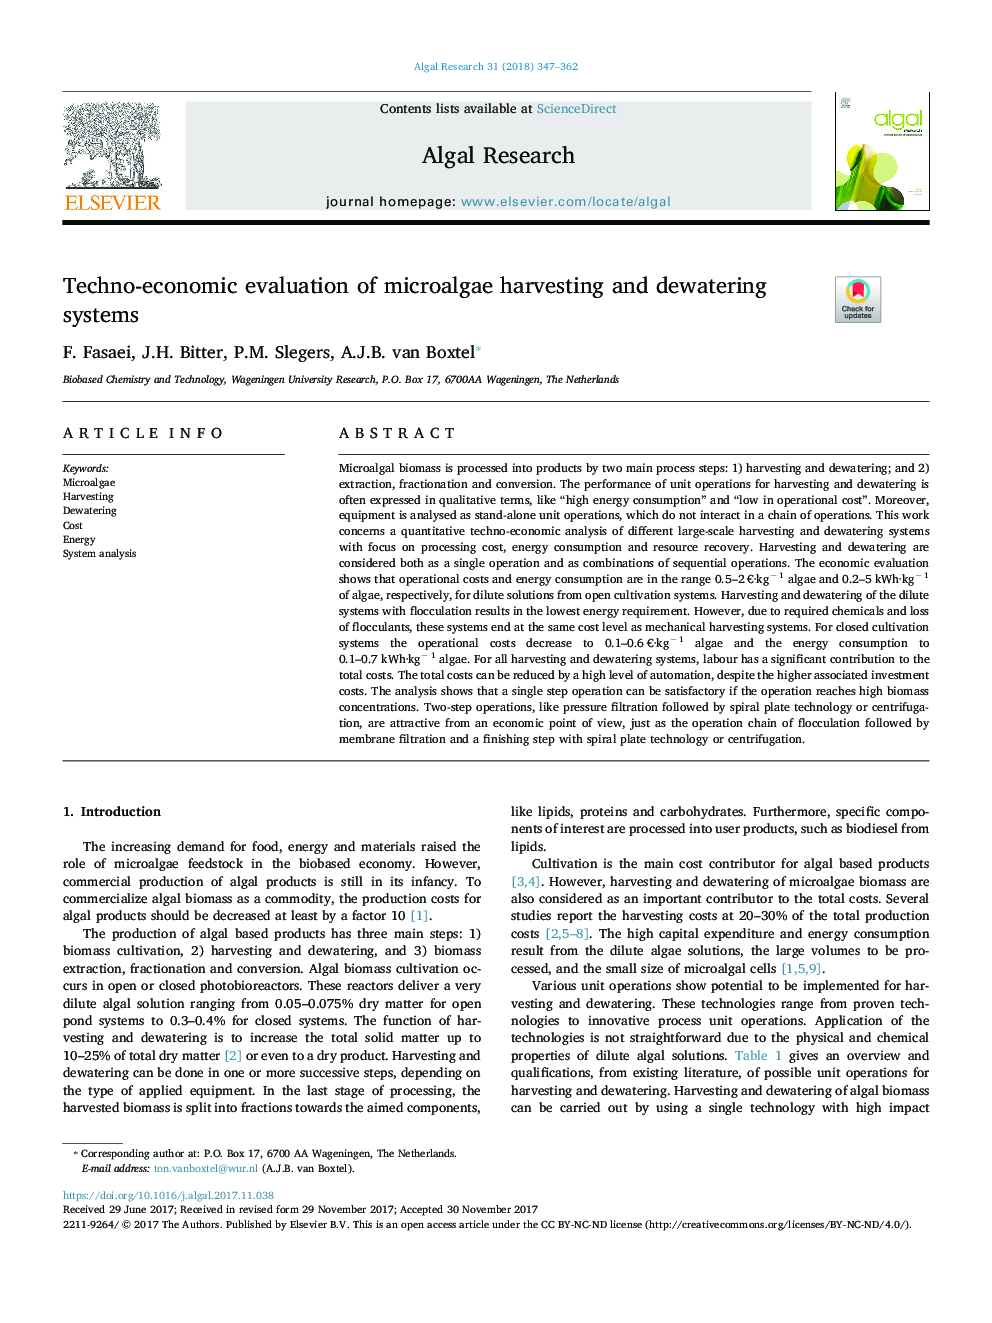 Techno-economic evaluation of microalgae harvesting and dewatering systems